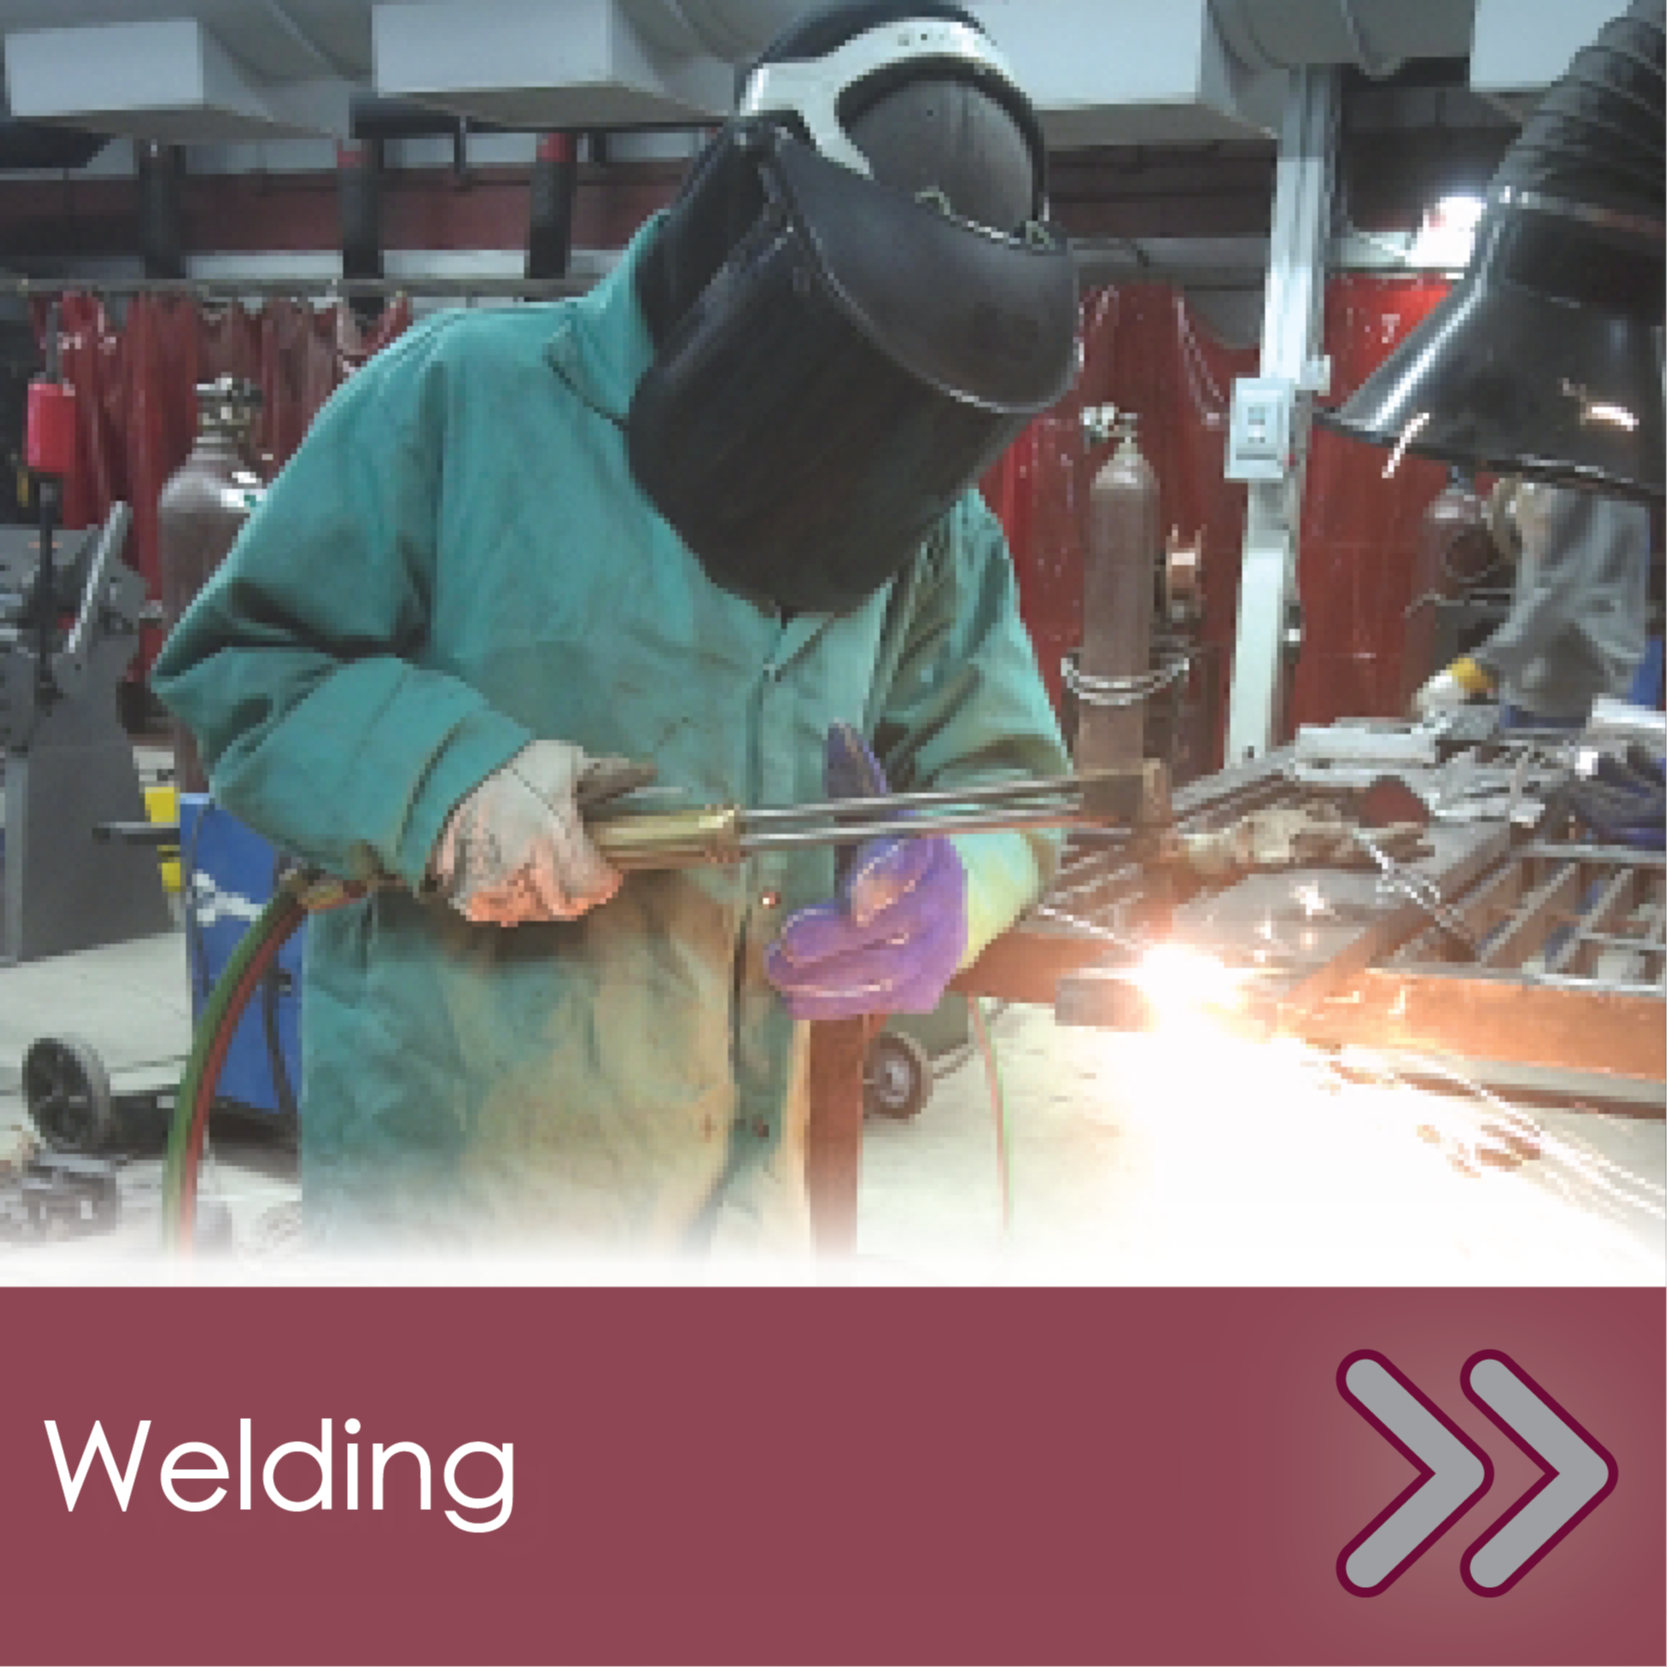 Student in hood using welding torches